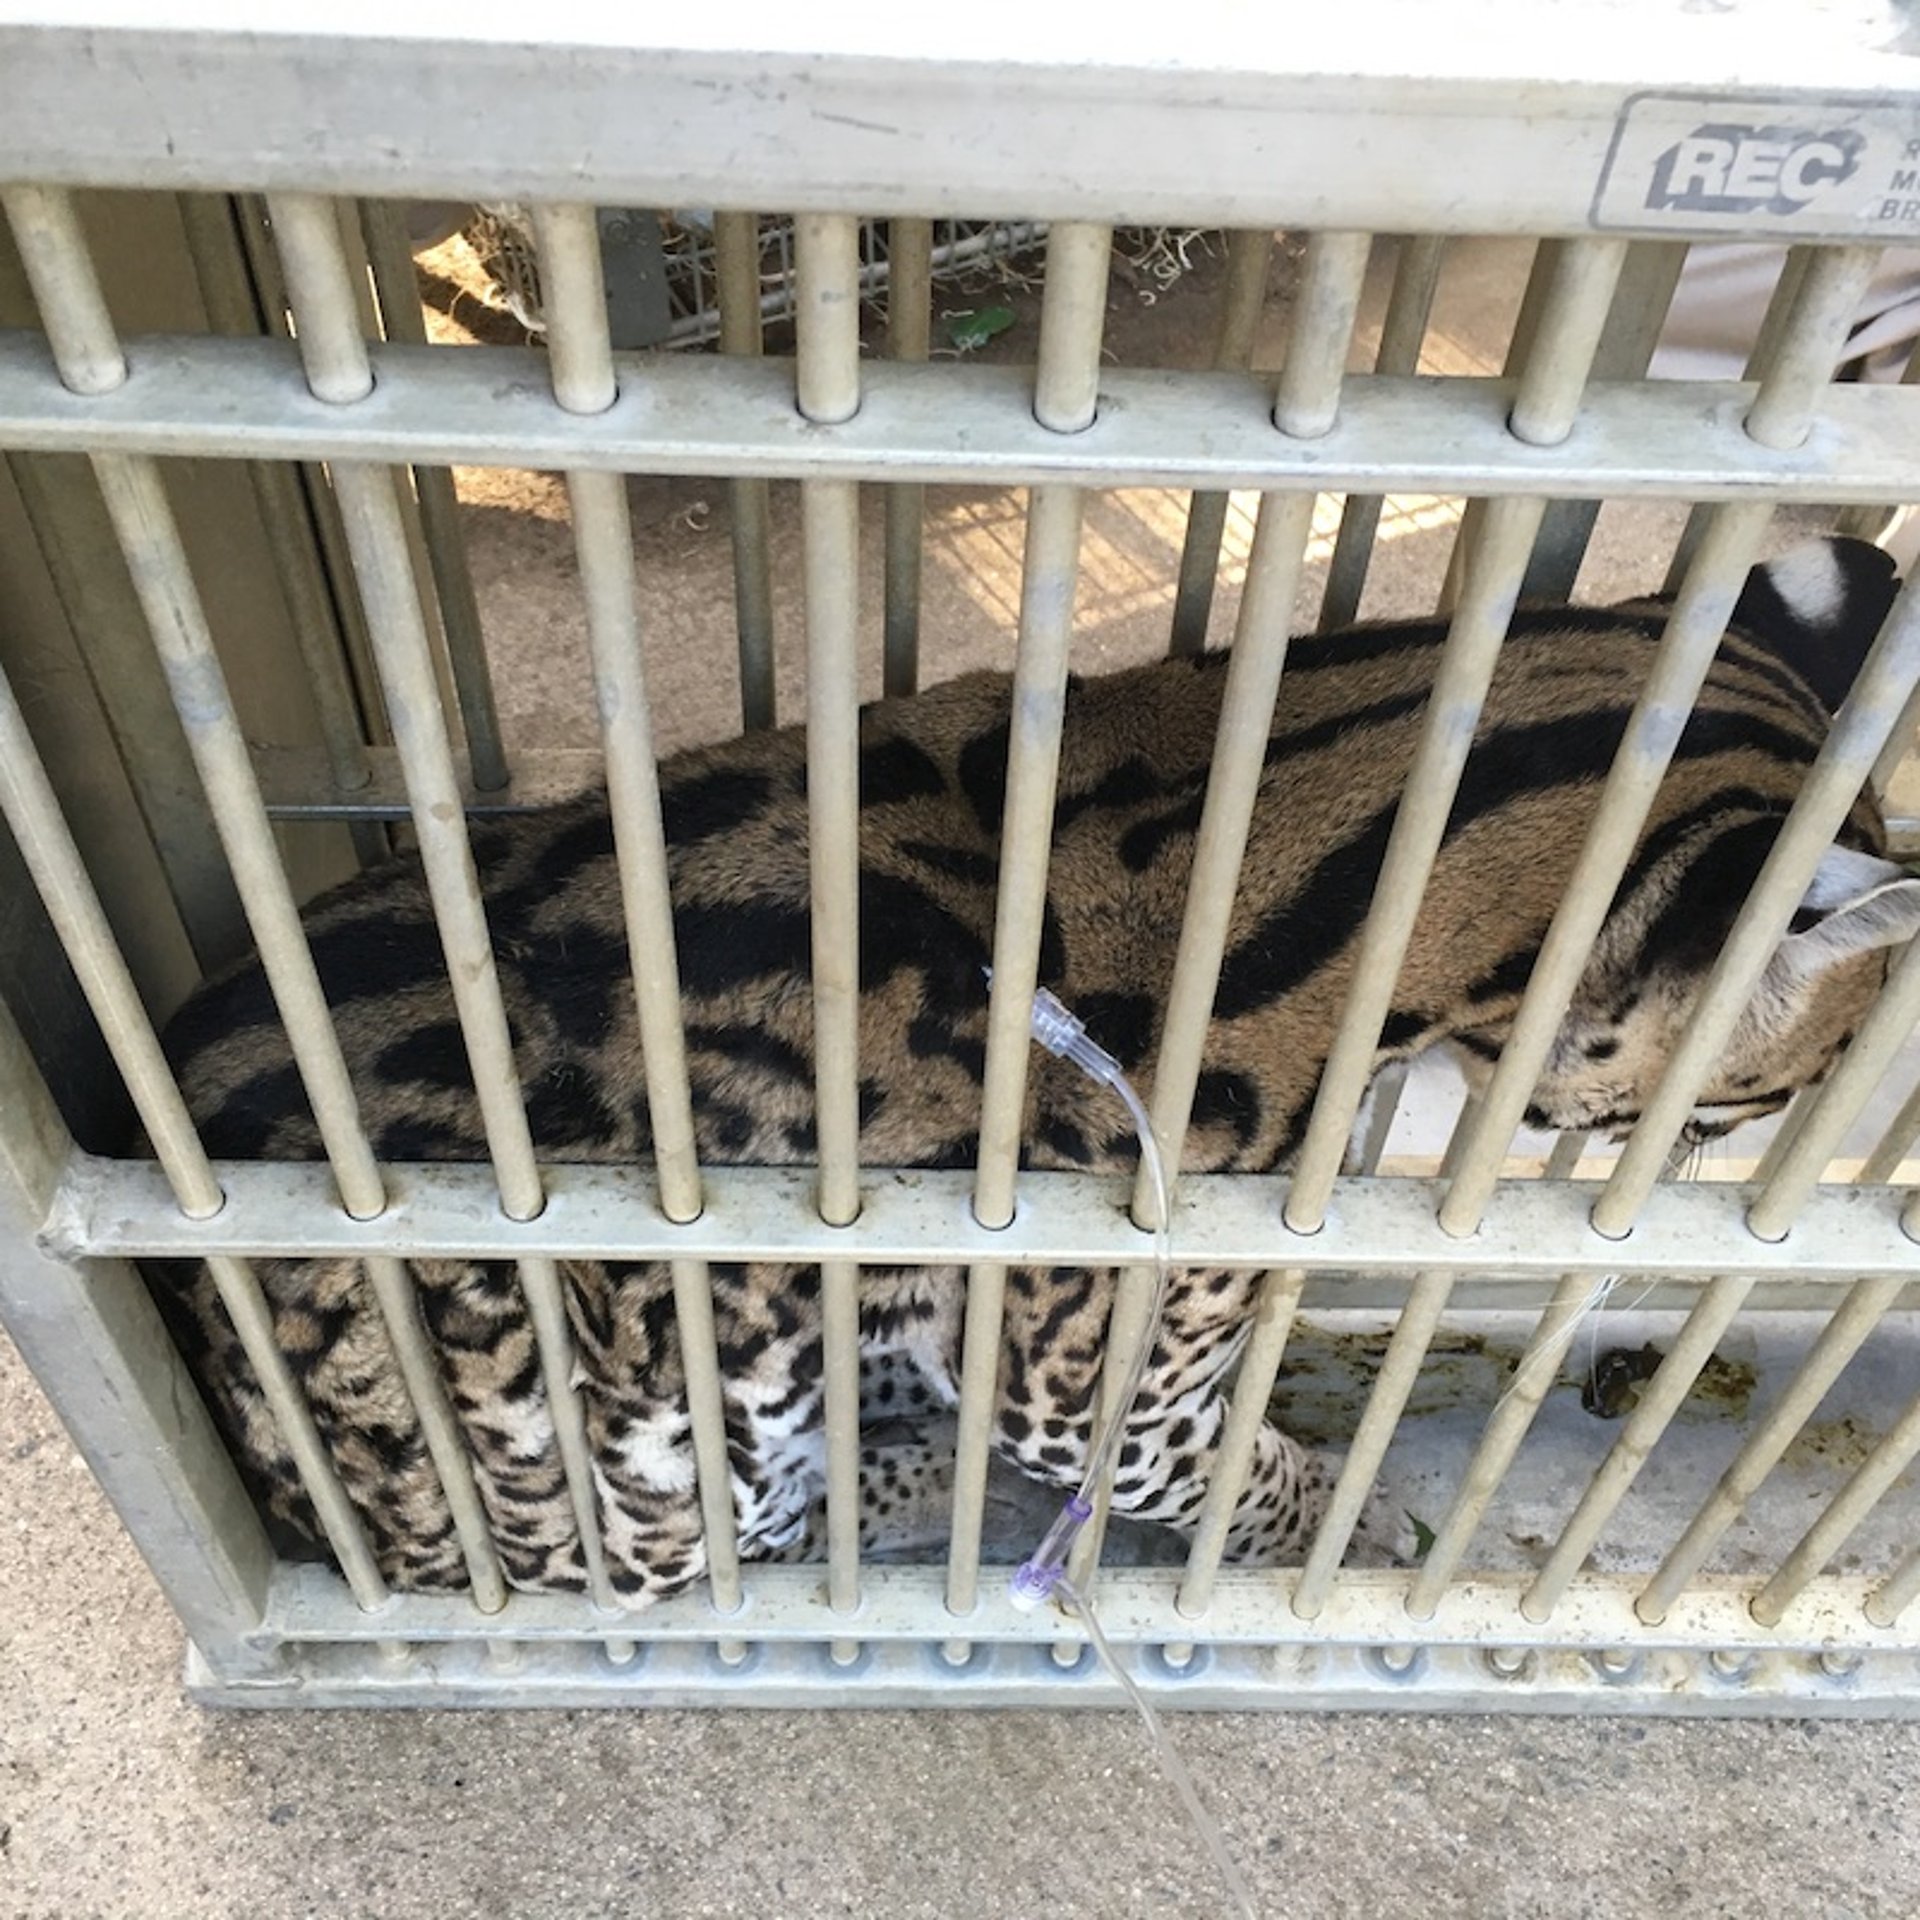 Squeeze cage restraint to facilitate administration of subcutaneous fluids to a captive ocelot